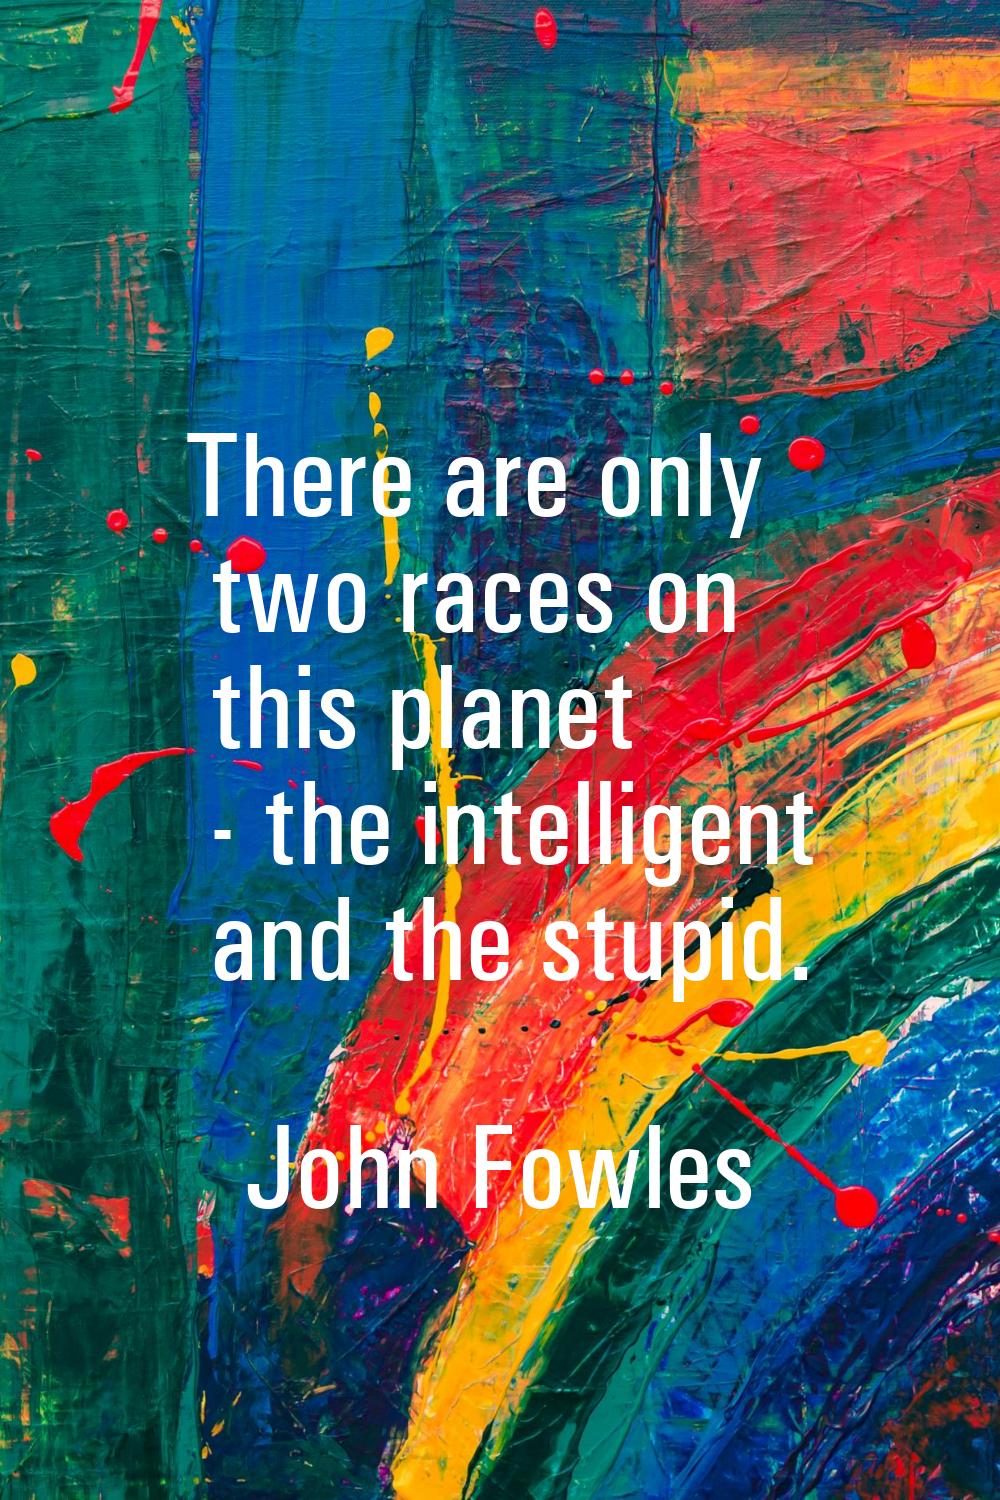 There are only two races on this planet - the intelligent and the stupid.